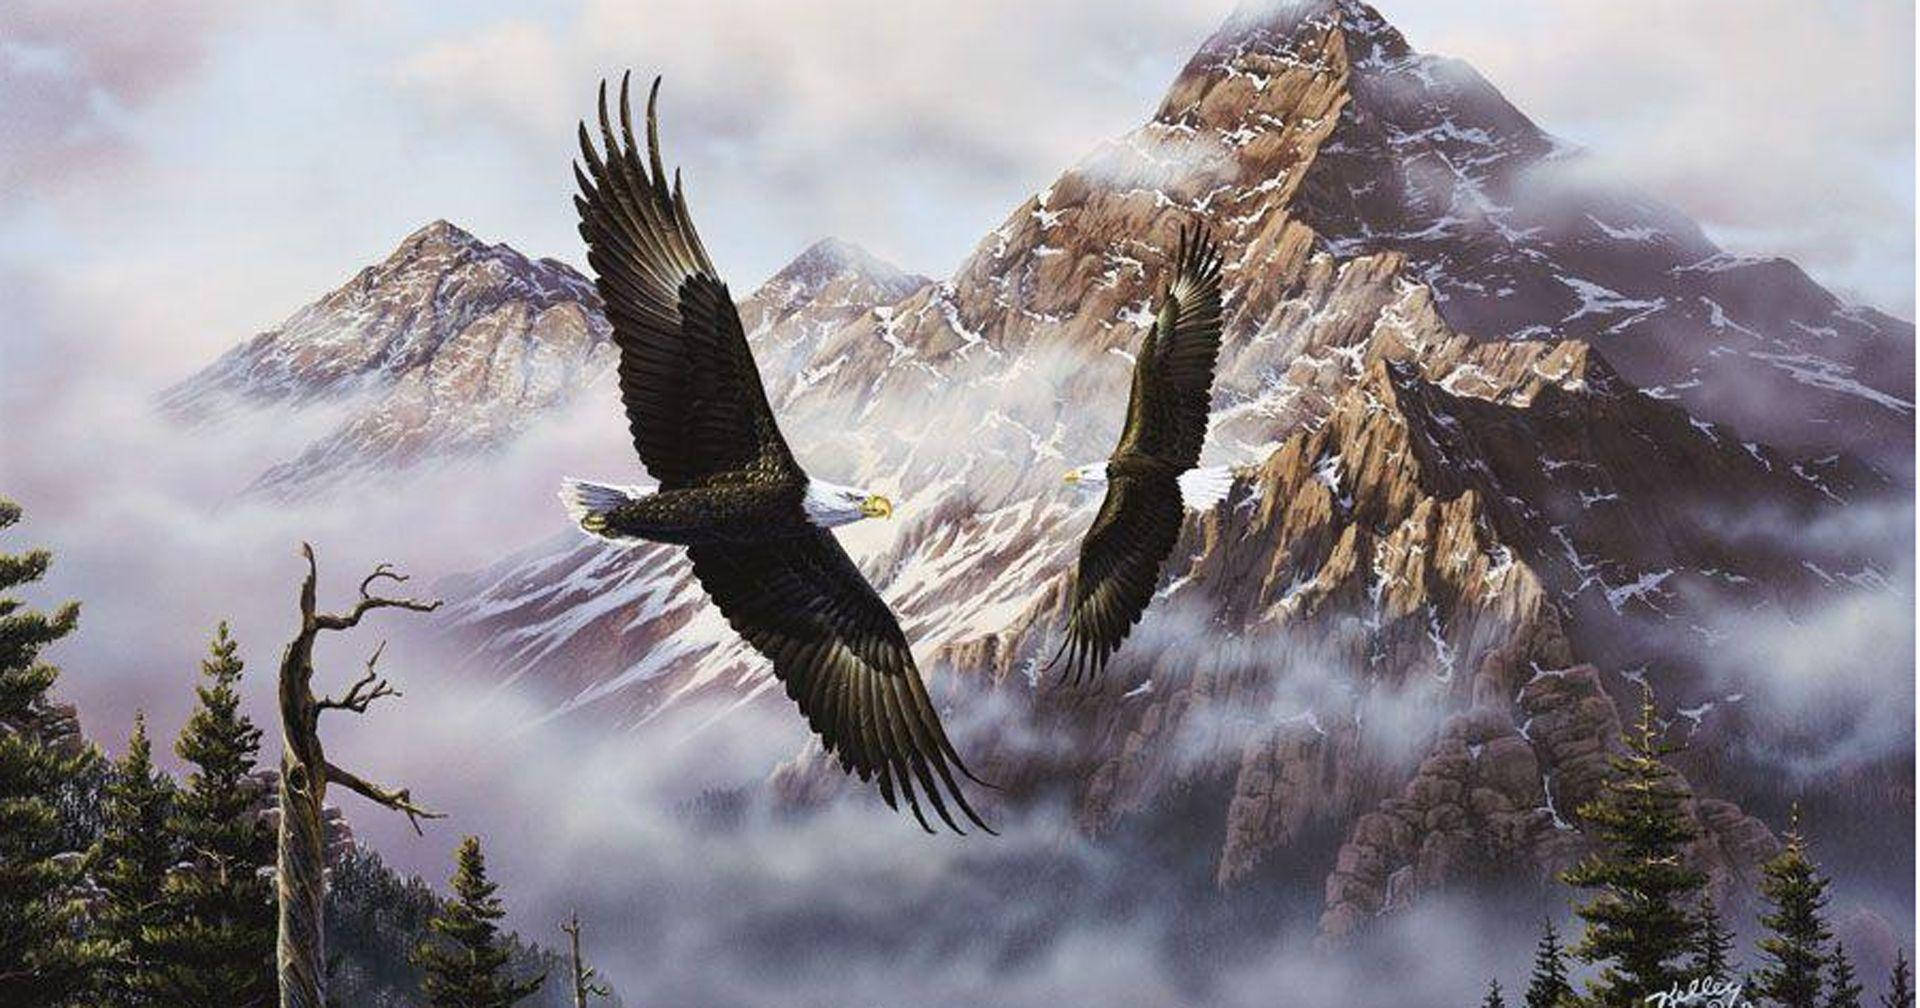 Us Eagle Over Mountains Background